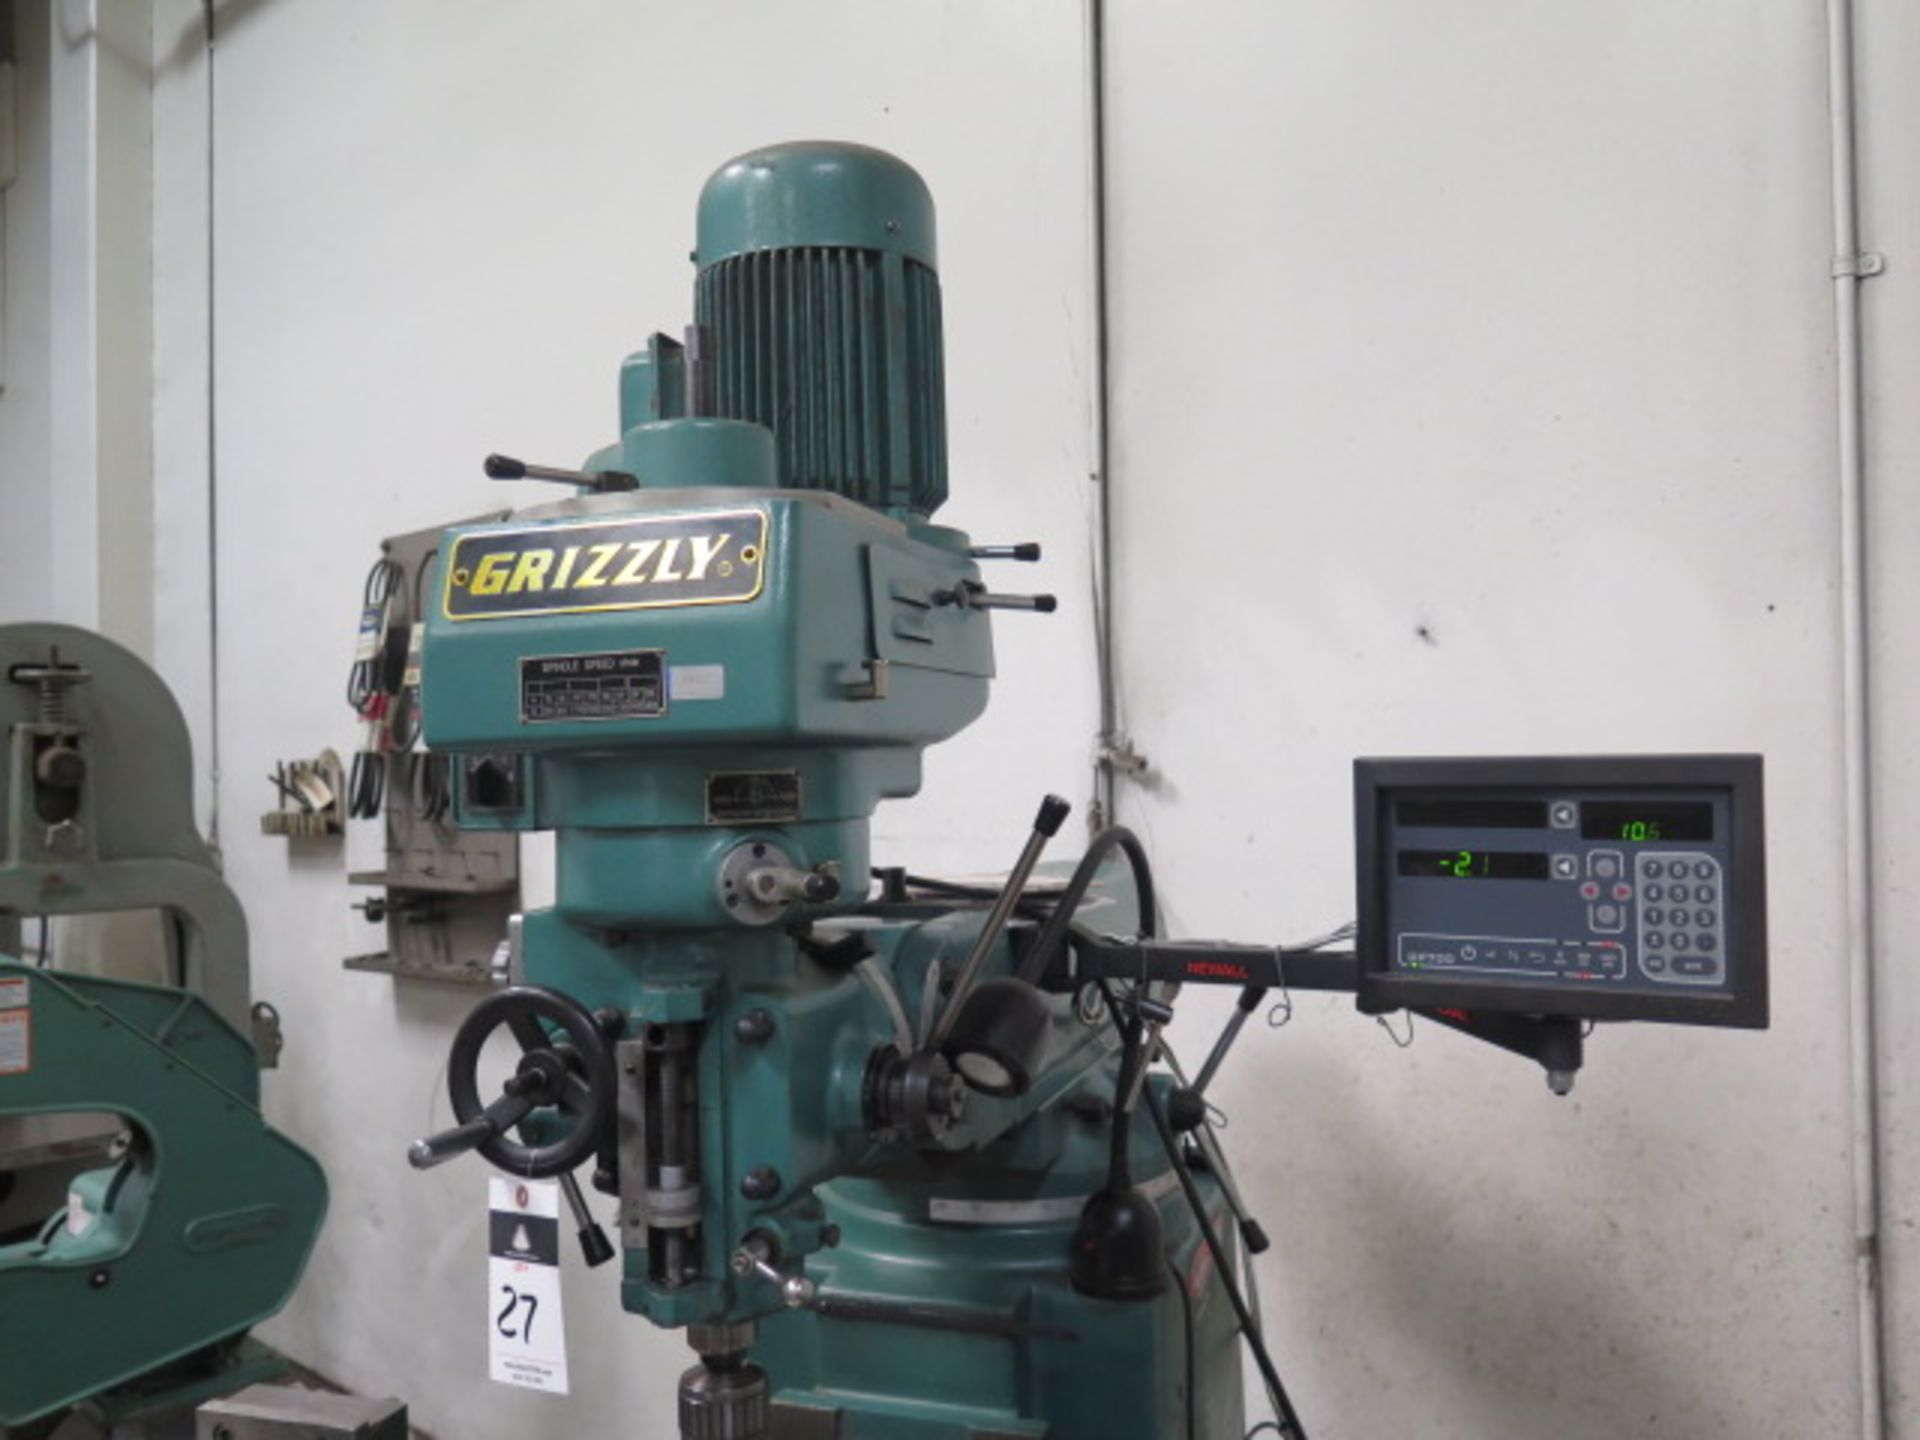 2012 Grizzly mdl. G9904 Vertical Mill s/n 4120467 w/ Newall DP700 Programmable DRO, 78-4800 RPM, - Image 3 of 11